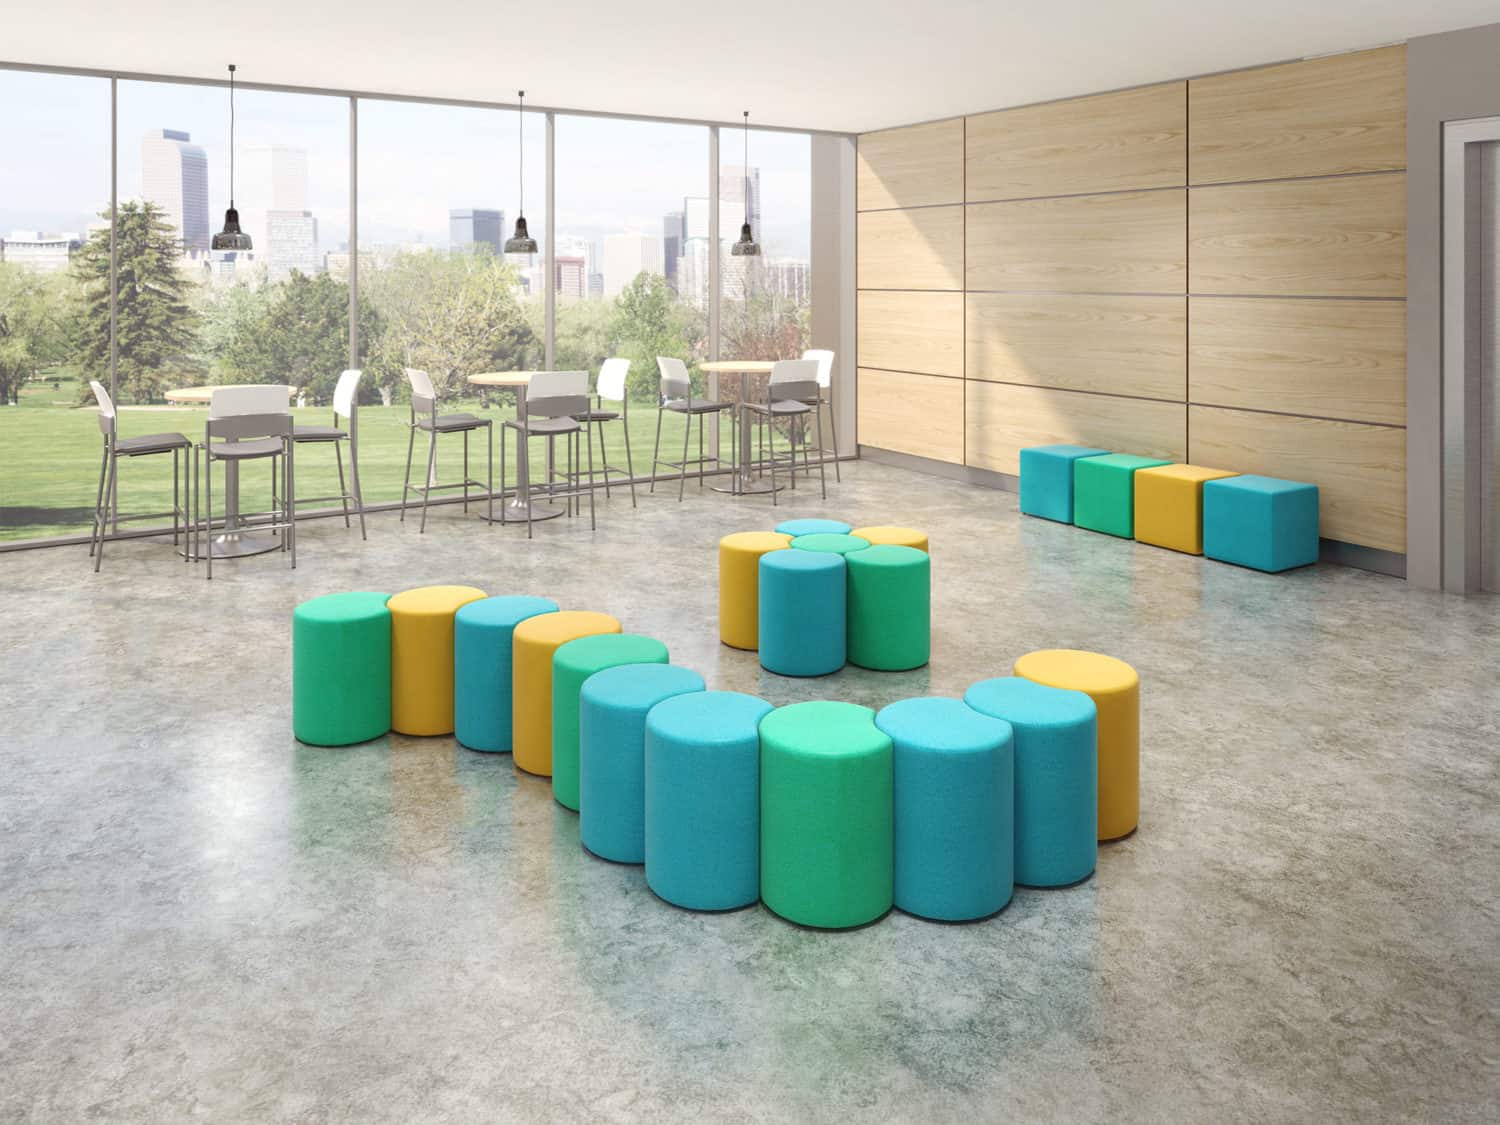 Kirby collaborative stools, Upland Bar Stools, shown in a lobby area